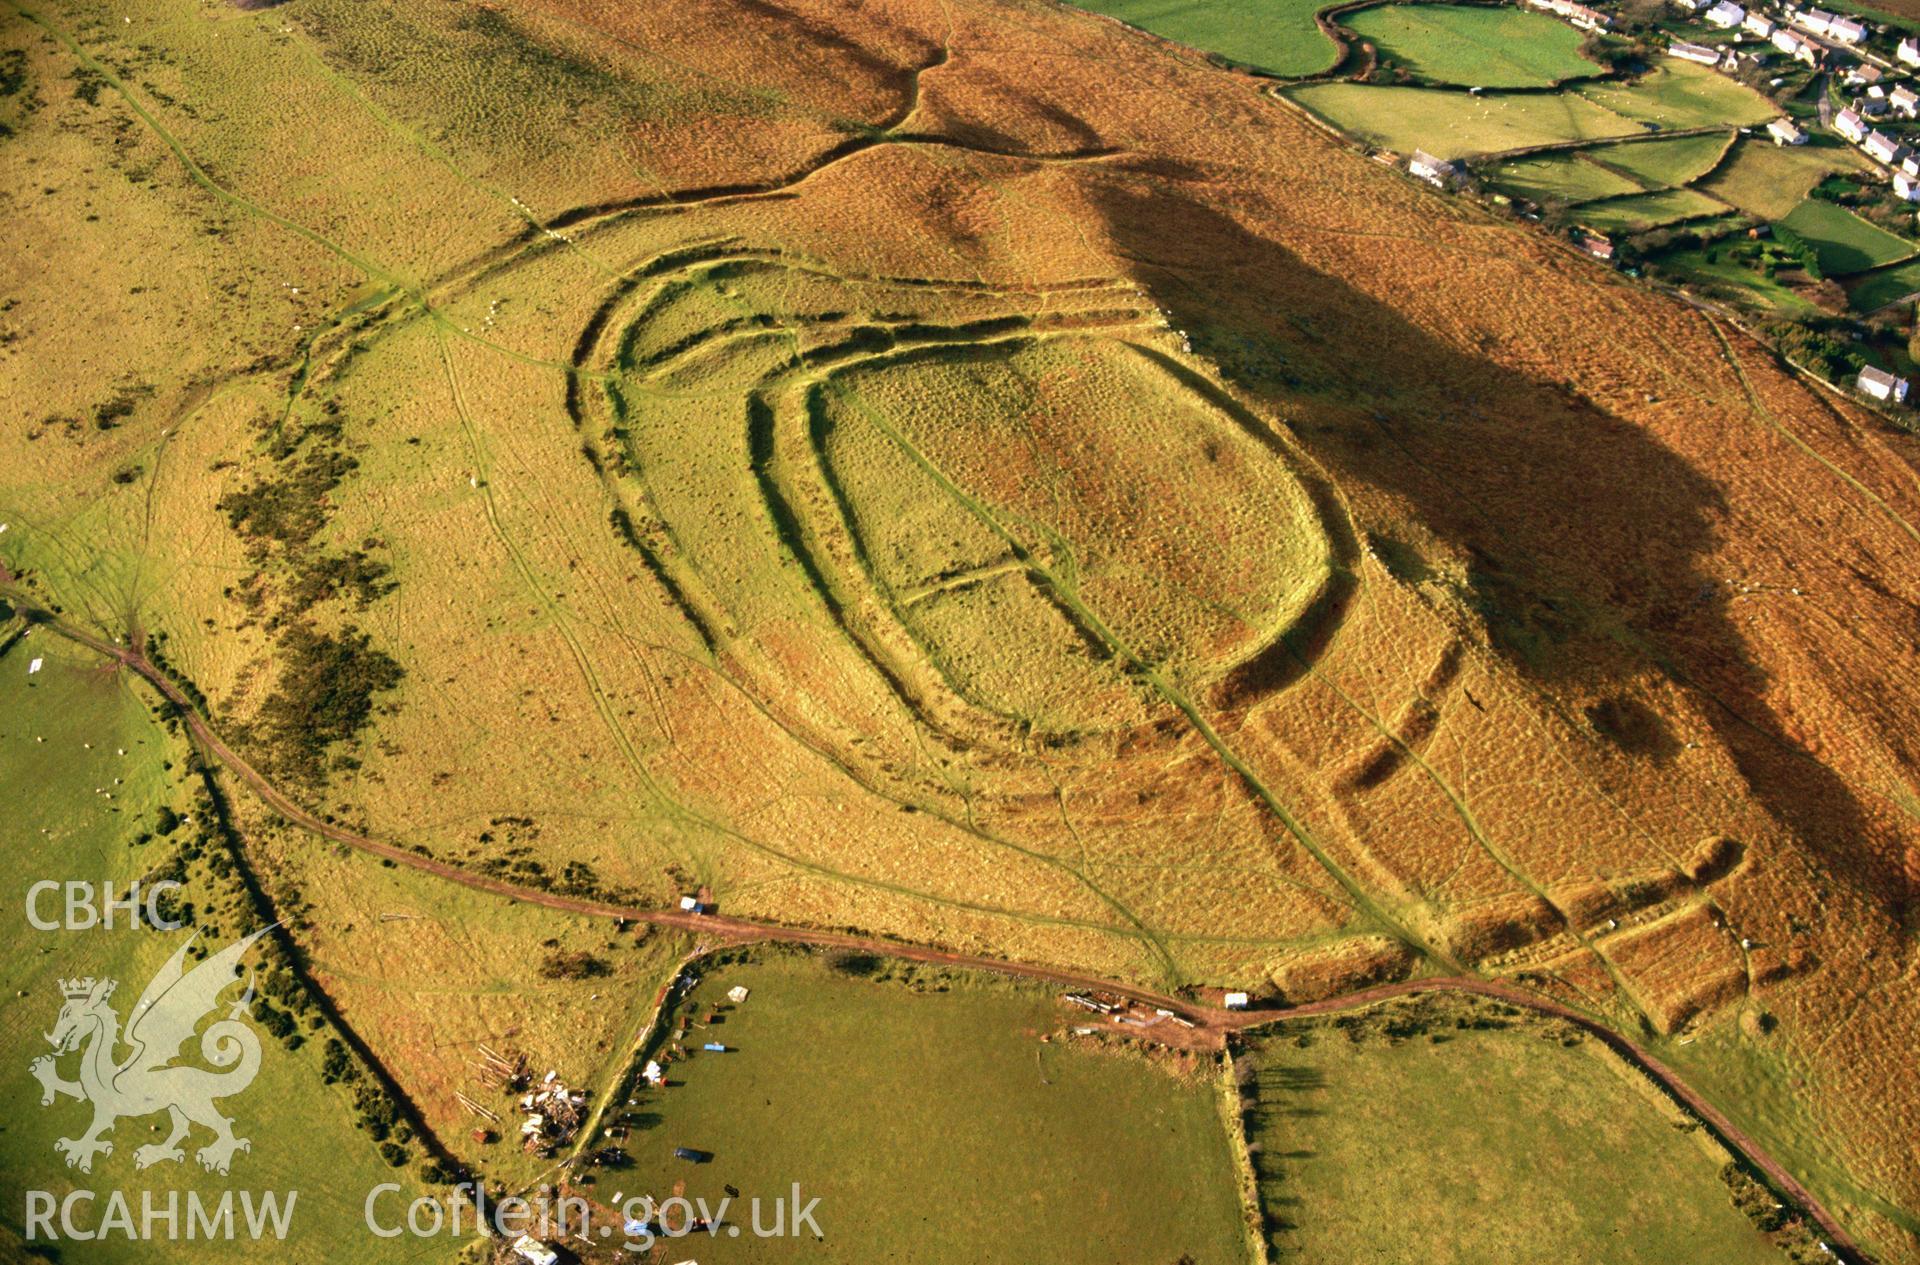 Slide of RCAHMW colour oblique aerial photograph of The Bulwark, Llanmadoc Hill, taken by C.R. Musson, 6/2/1988.